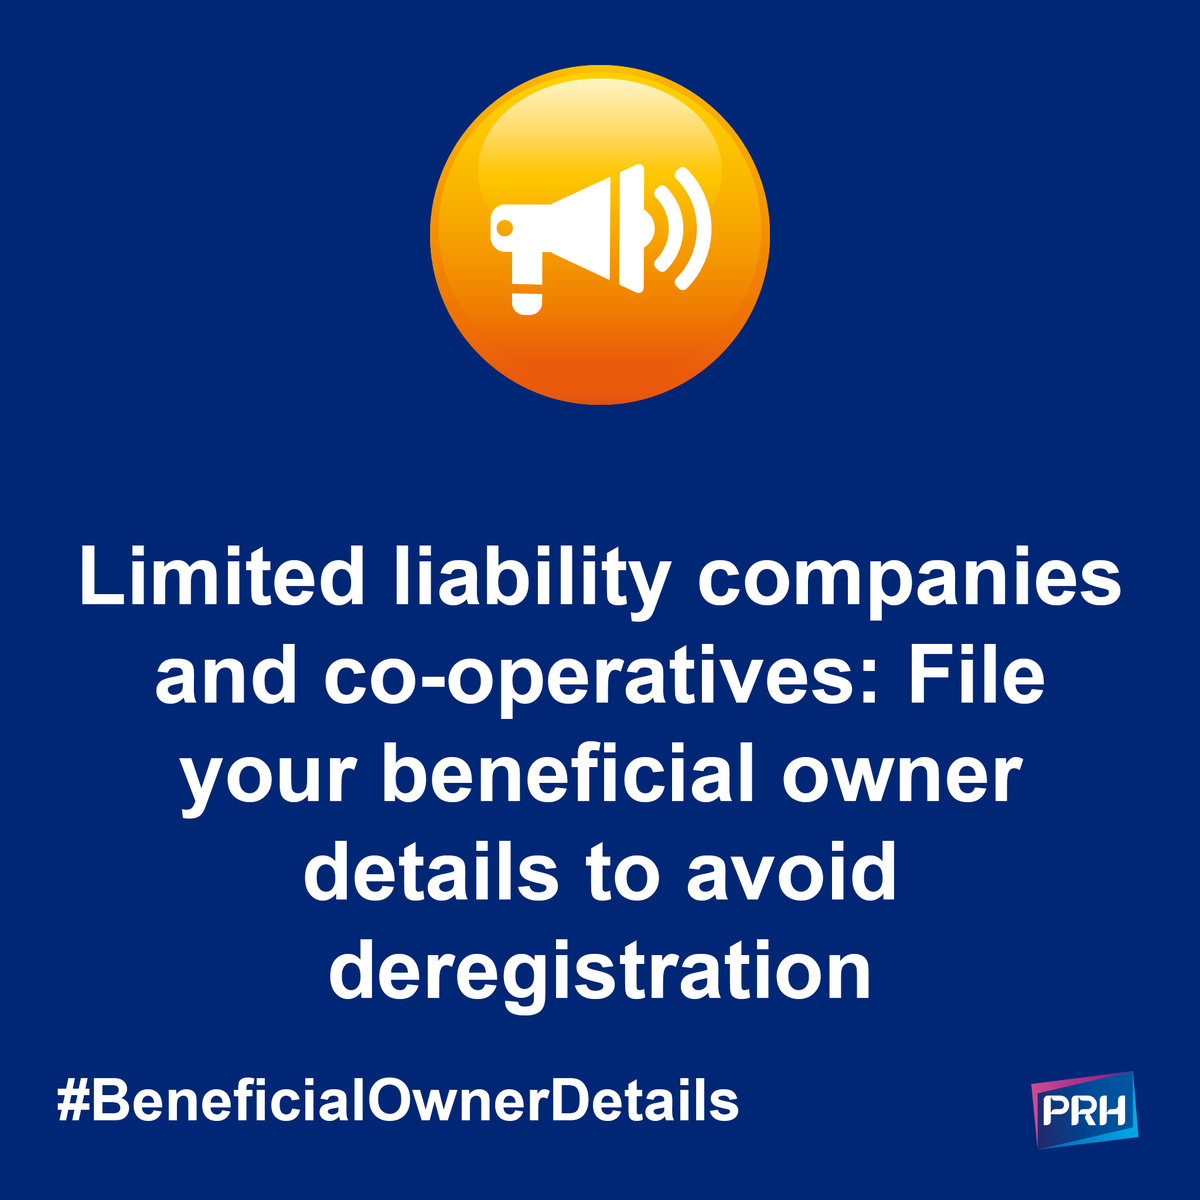 All limited liability companies and co-operatives must file their beneficial owner details with the Finnish Trade Register. This does not apply to listed companies or mutual real estate limited companies ⚠️ Read more: prh.fi/en/asiakastied… #BeneficialOwner